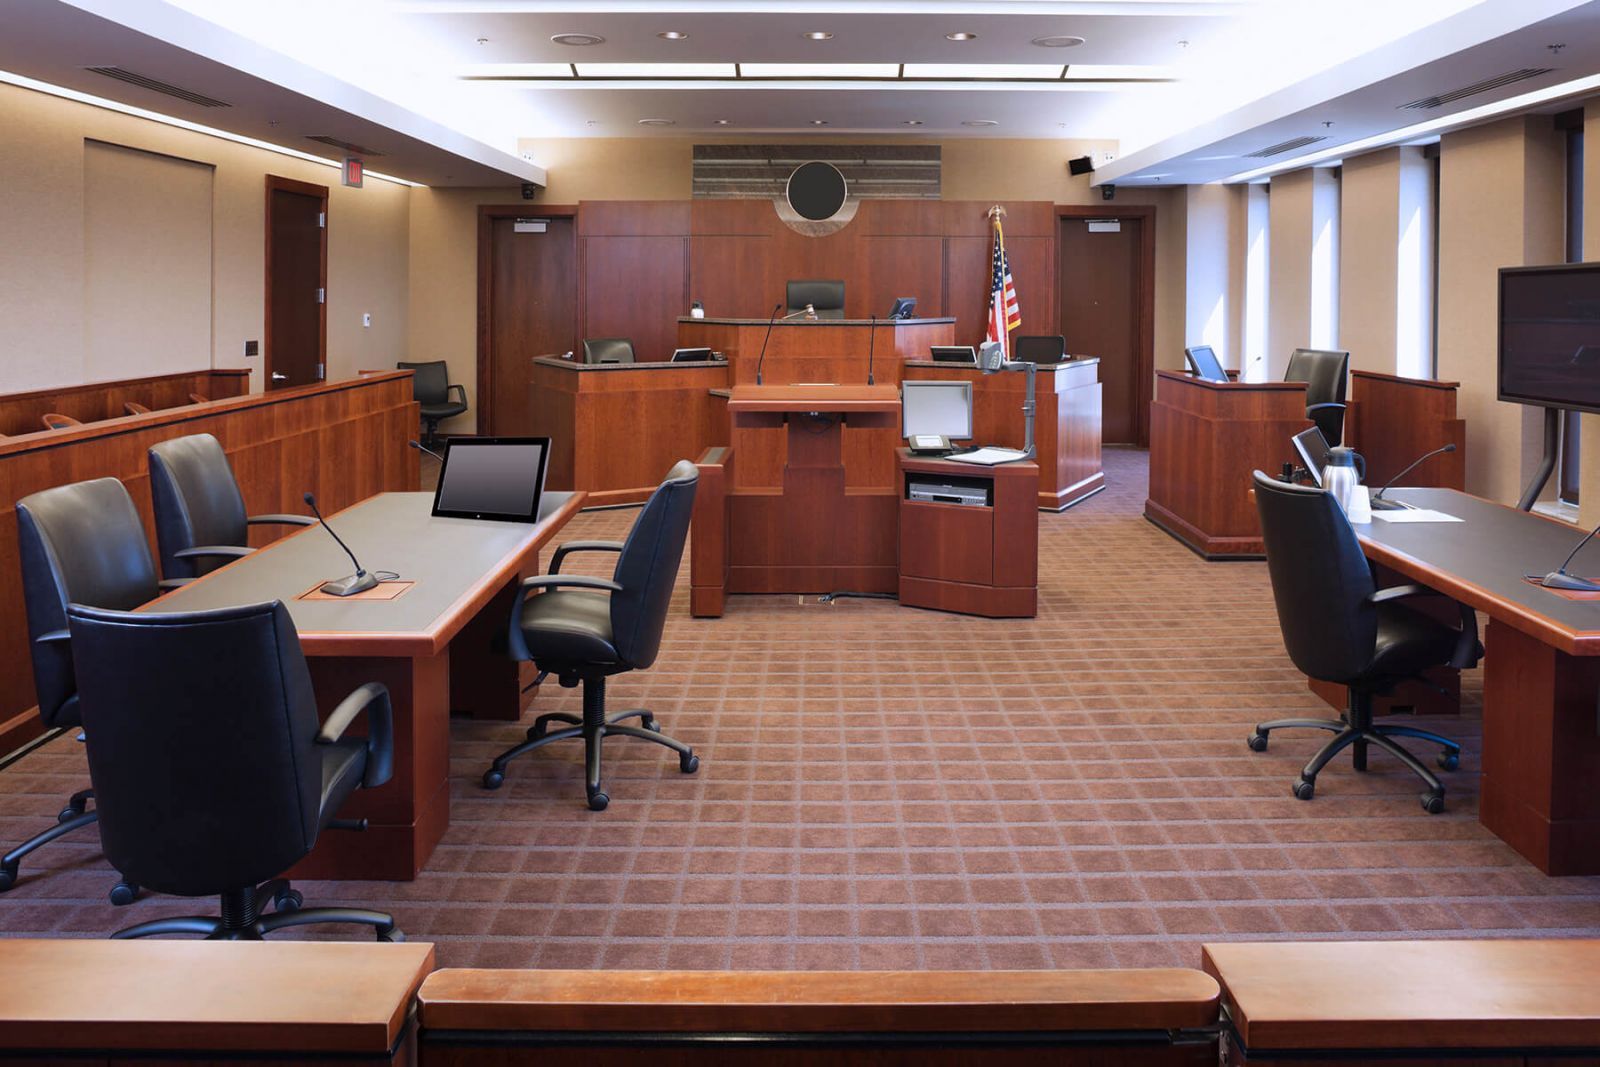 Courtroom video recording solution case study - industrial motherboard